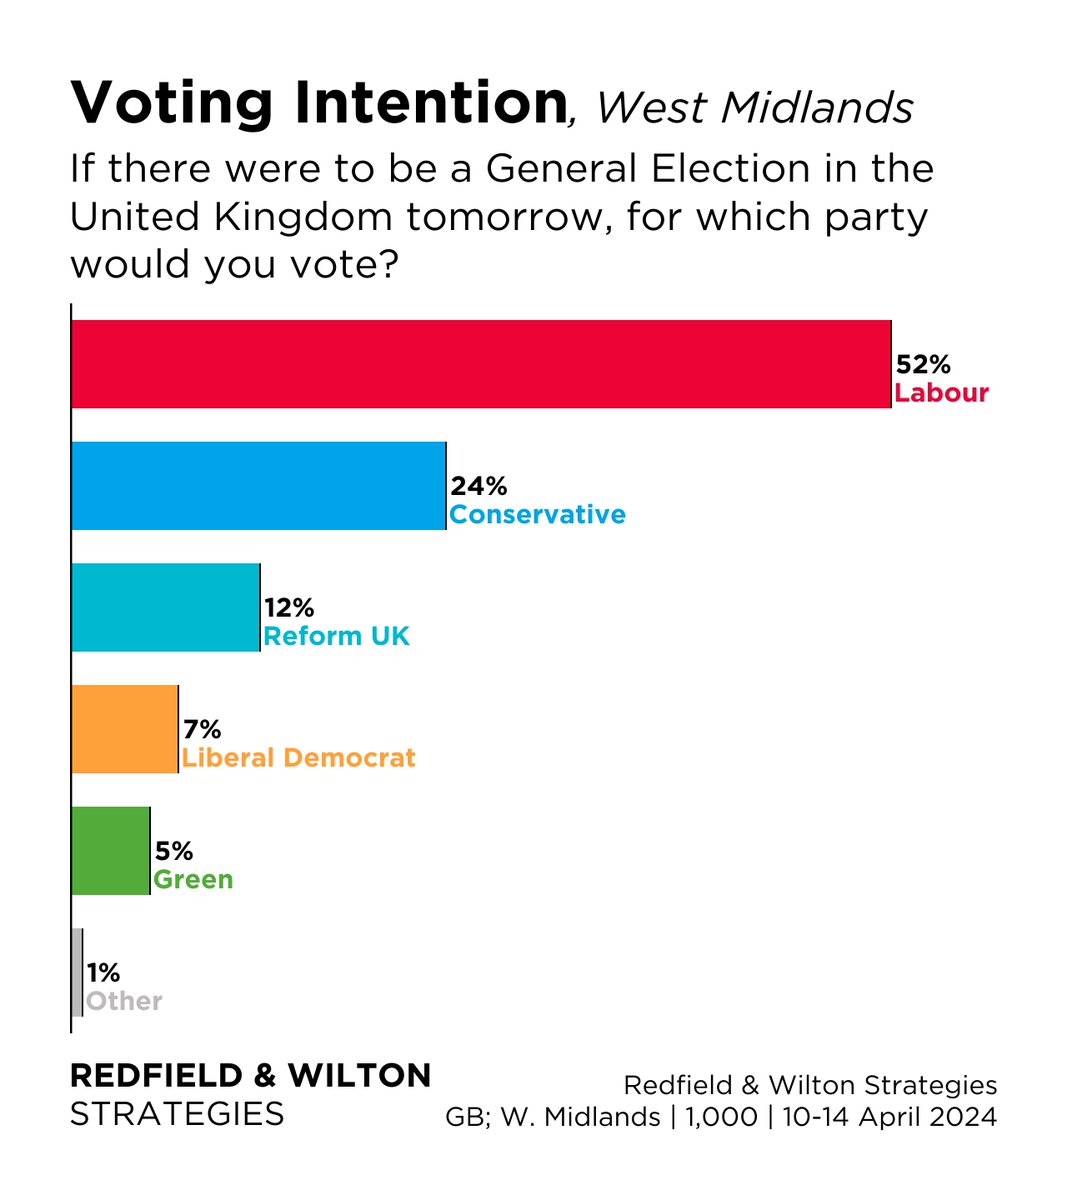 Labour leads the Conservatives by 28% in the West Midlands (county). West Midlands Westminster VI (10-14 April): Labour 52% Conservative 24% Reform UK 12% Liberal Democrat 7% Green 5% Other 1% redfieldandwiltonstrategies.com/west-midlands-…